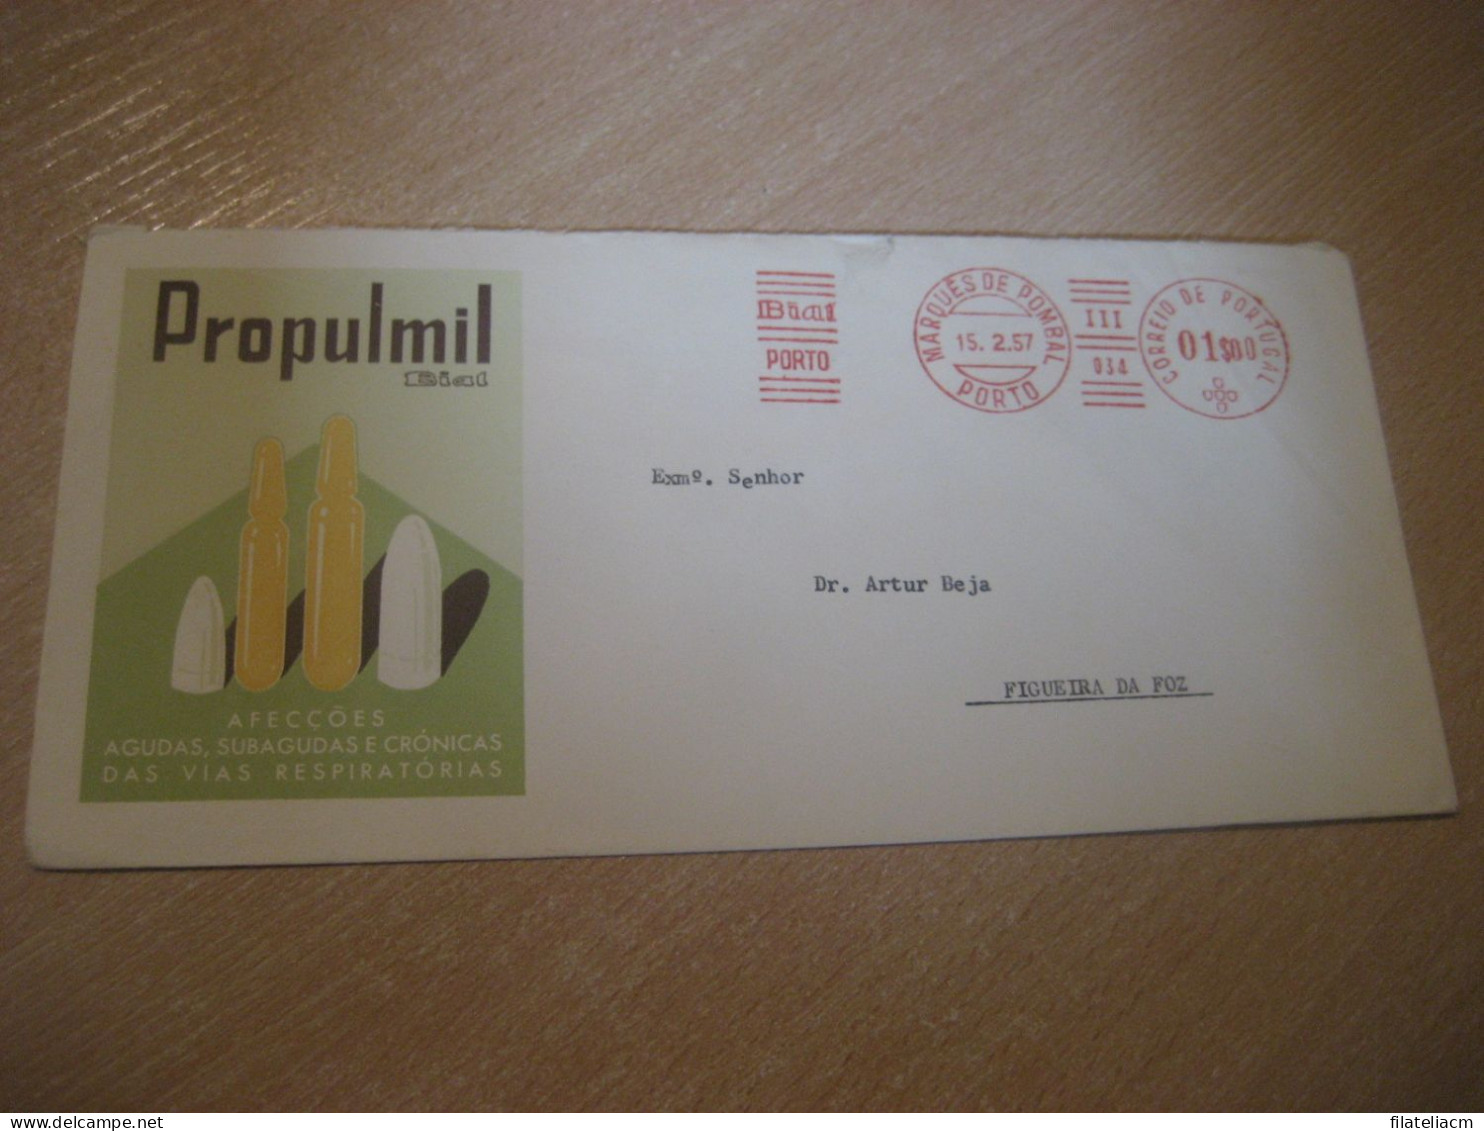 PORTO 1957 To Figueira Da Foz Bial Propulmil Pharmacy Health Chemical Meter Mail Cancel Cover PORTUGAL - Covers & Documents